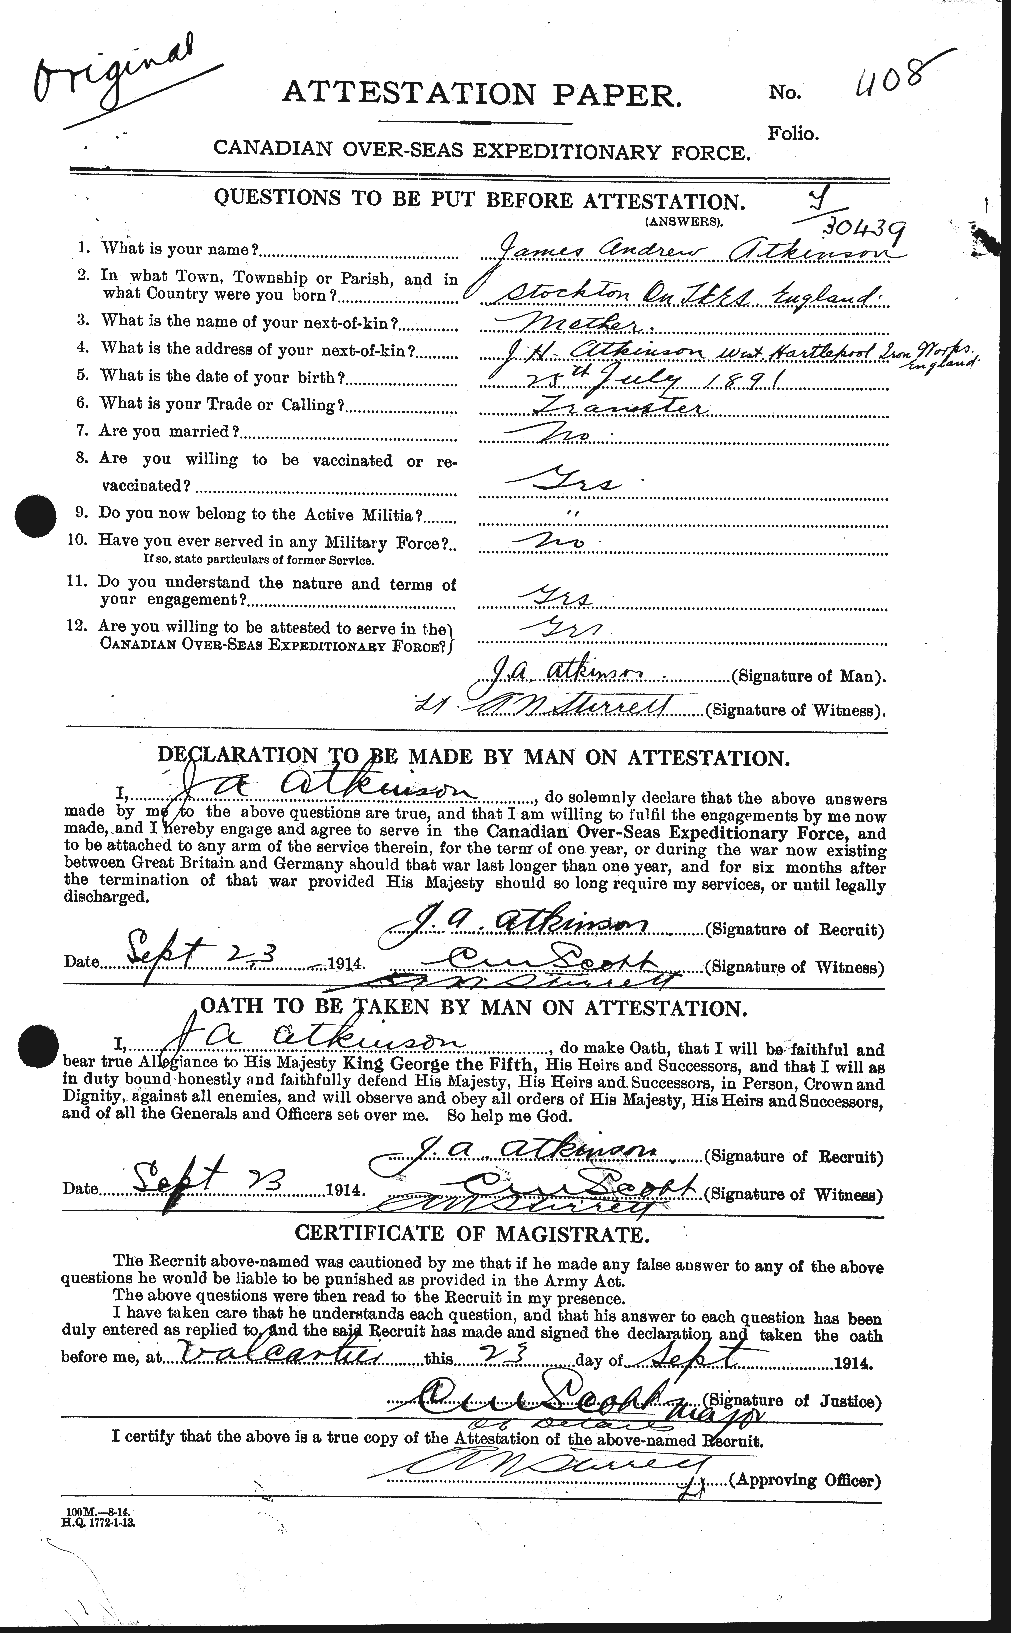 Personnel Records of the First World War - CEF 217354a